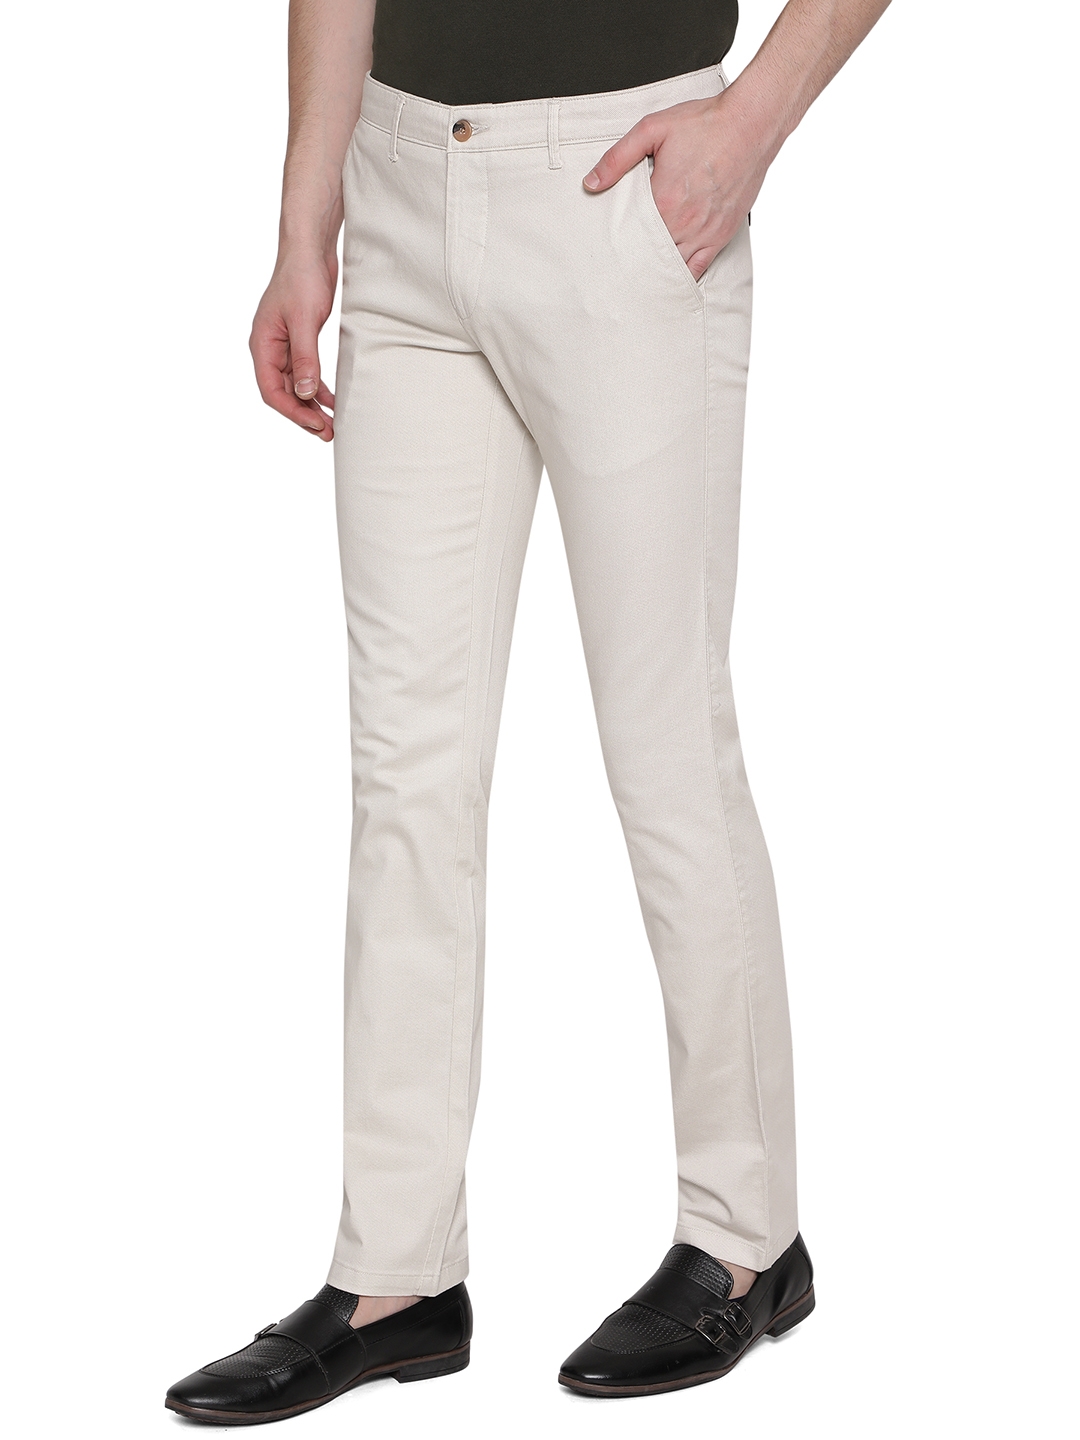 Greenfibre | Fawn Solid Super Slim Fit Casual Trouser | Greenfibre 1